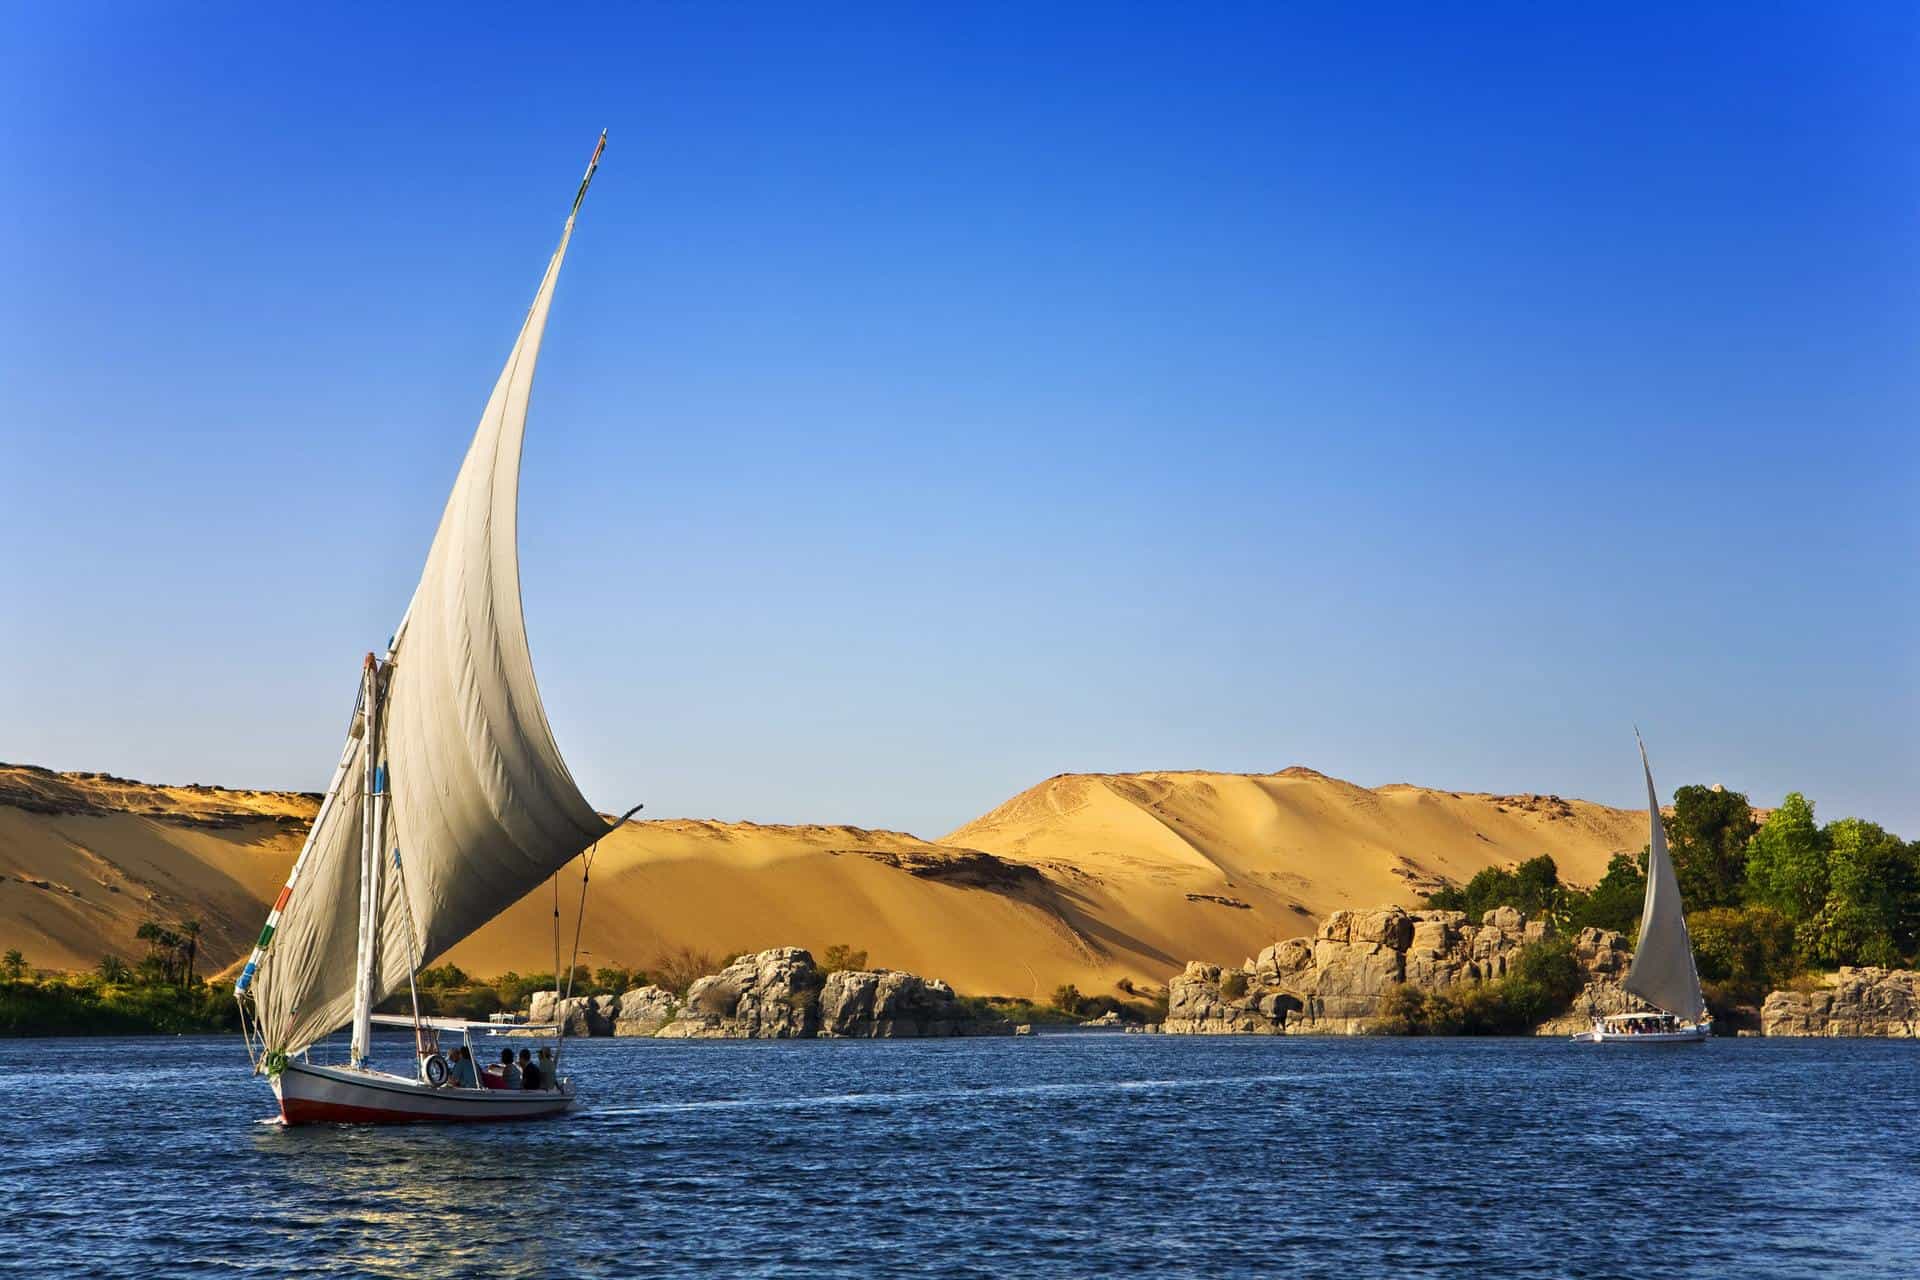 Journey Down the Nile